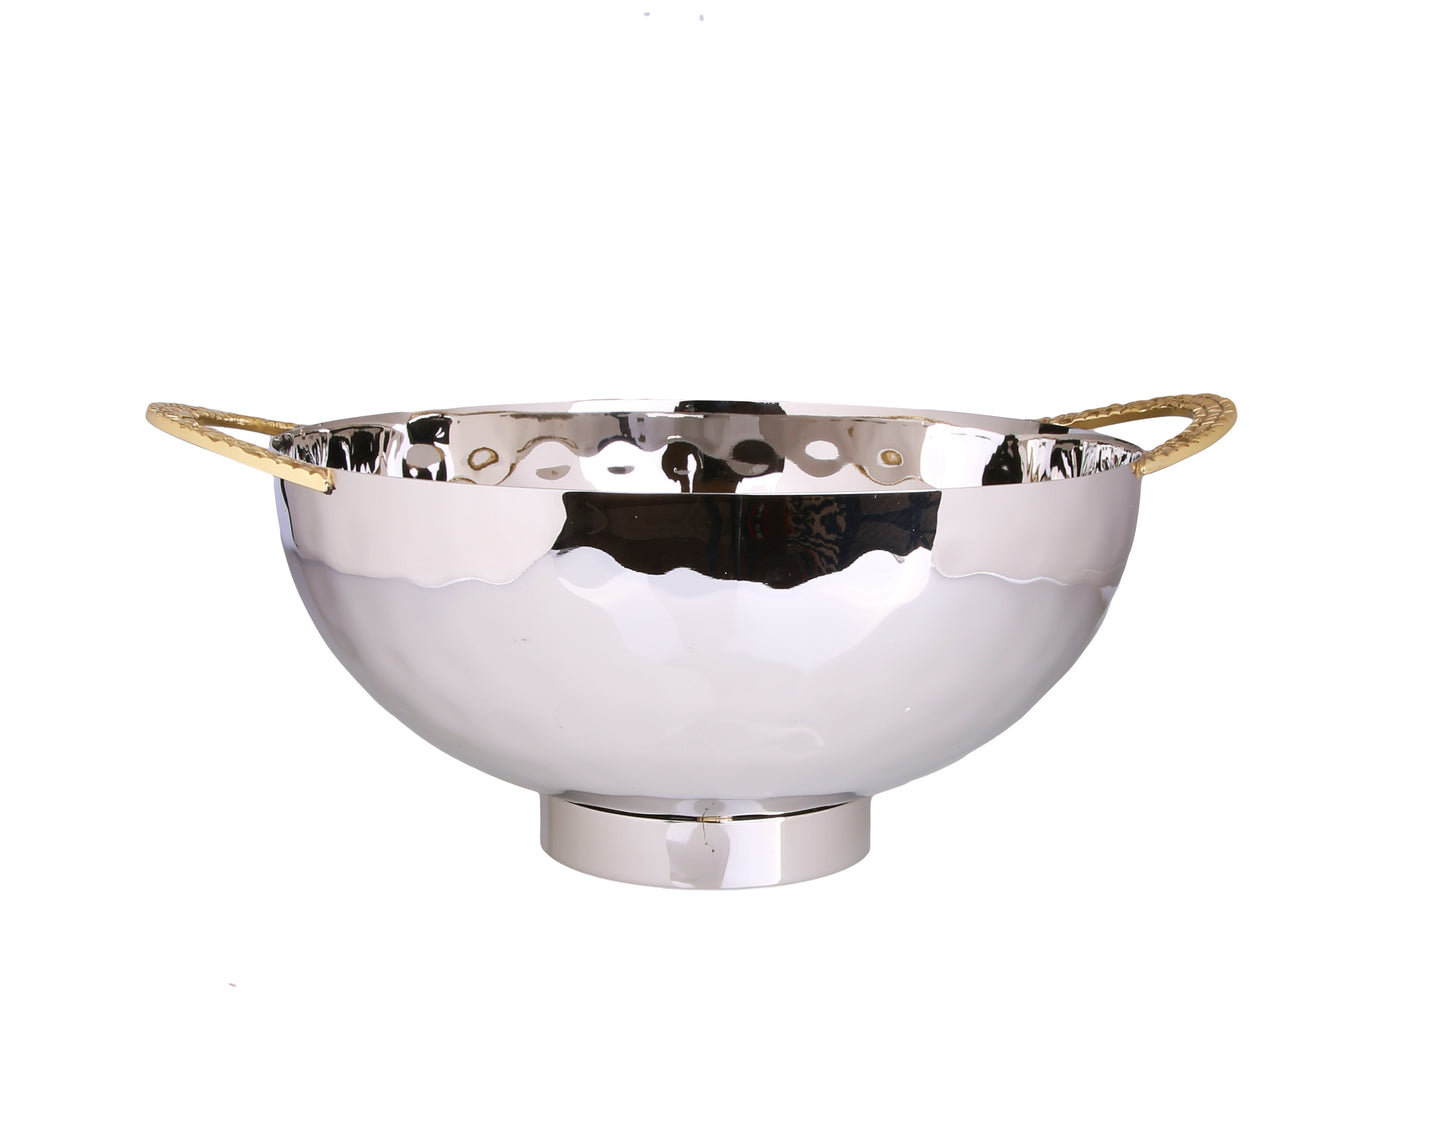 Stainless Steel Salad Bowl With Mosaic Handles - 12.5